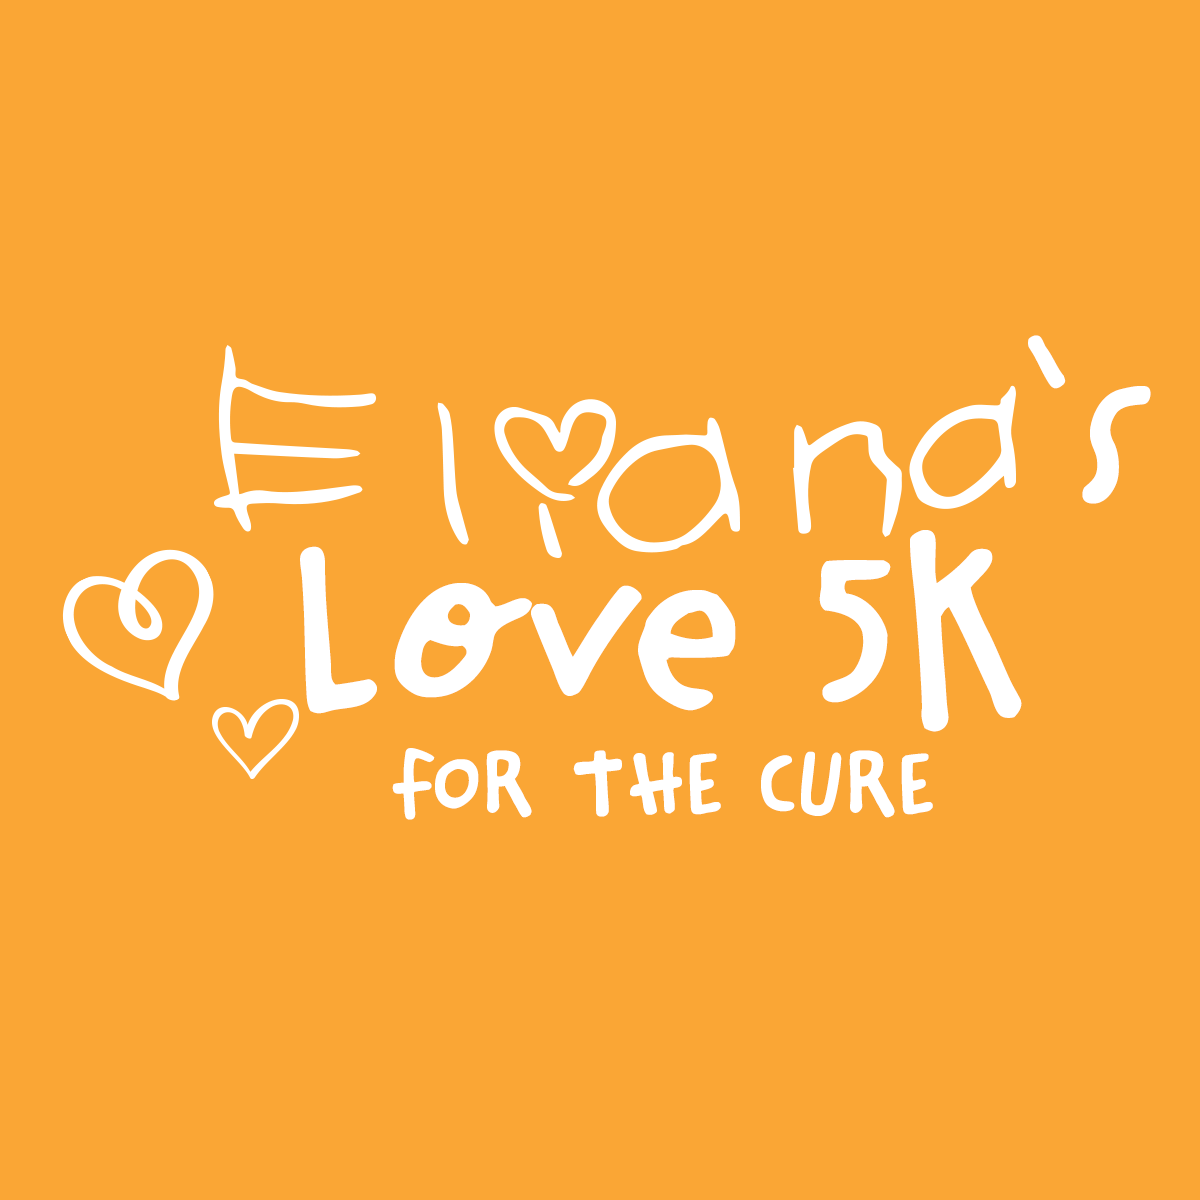 Eliana's Love 5k for the Cure